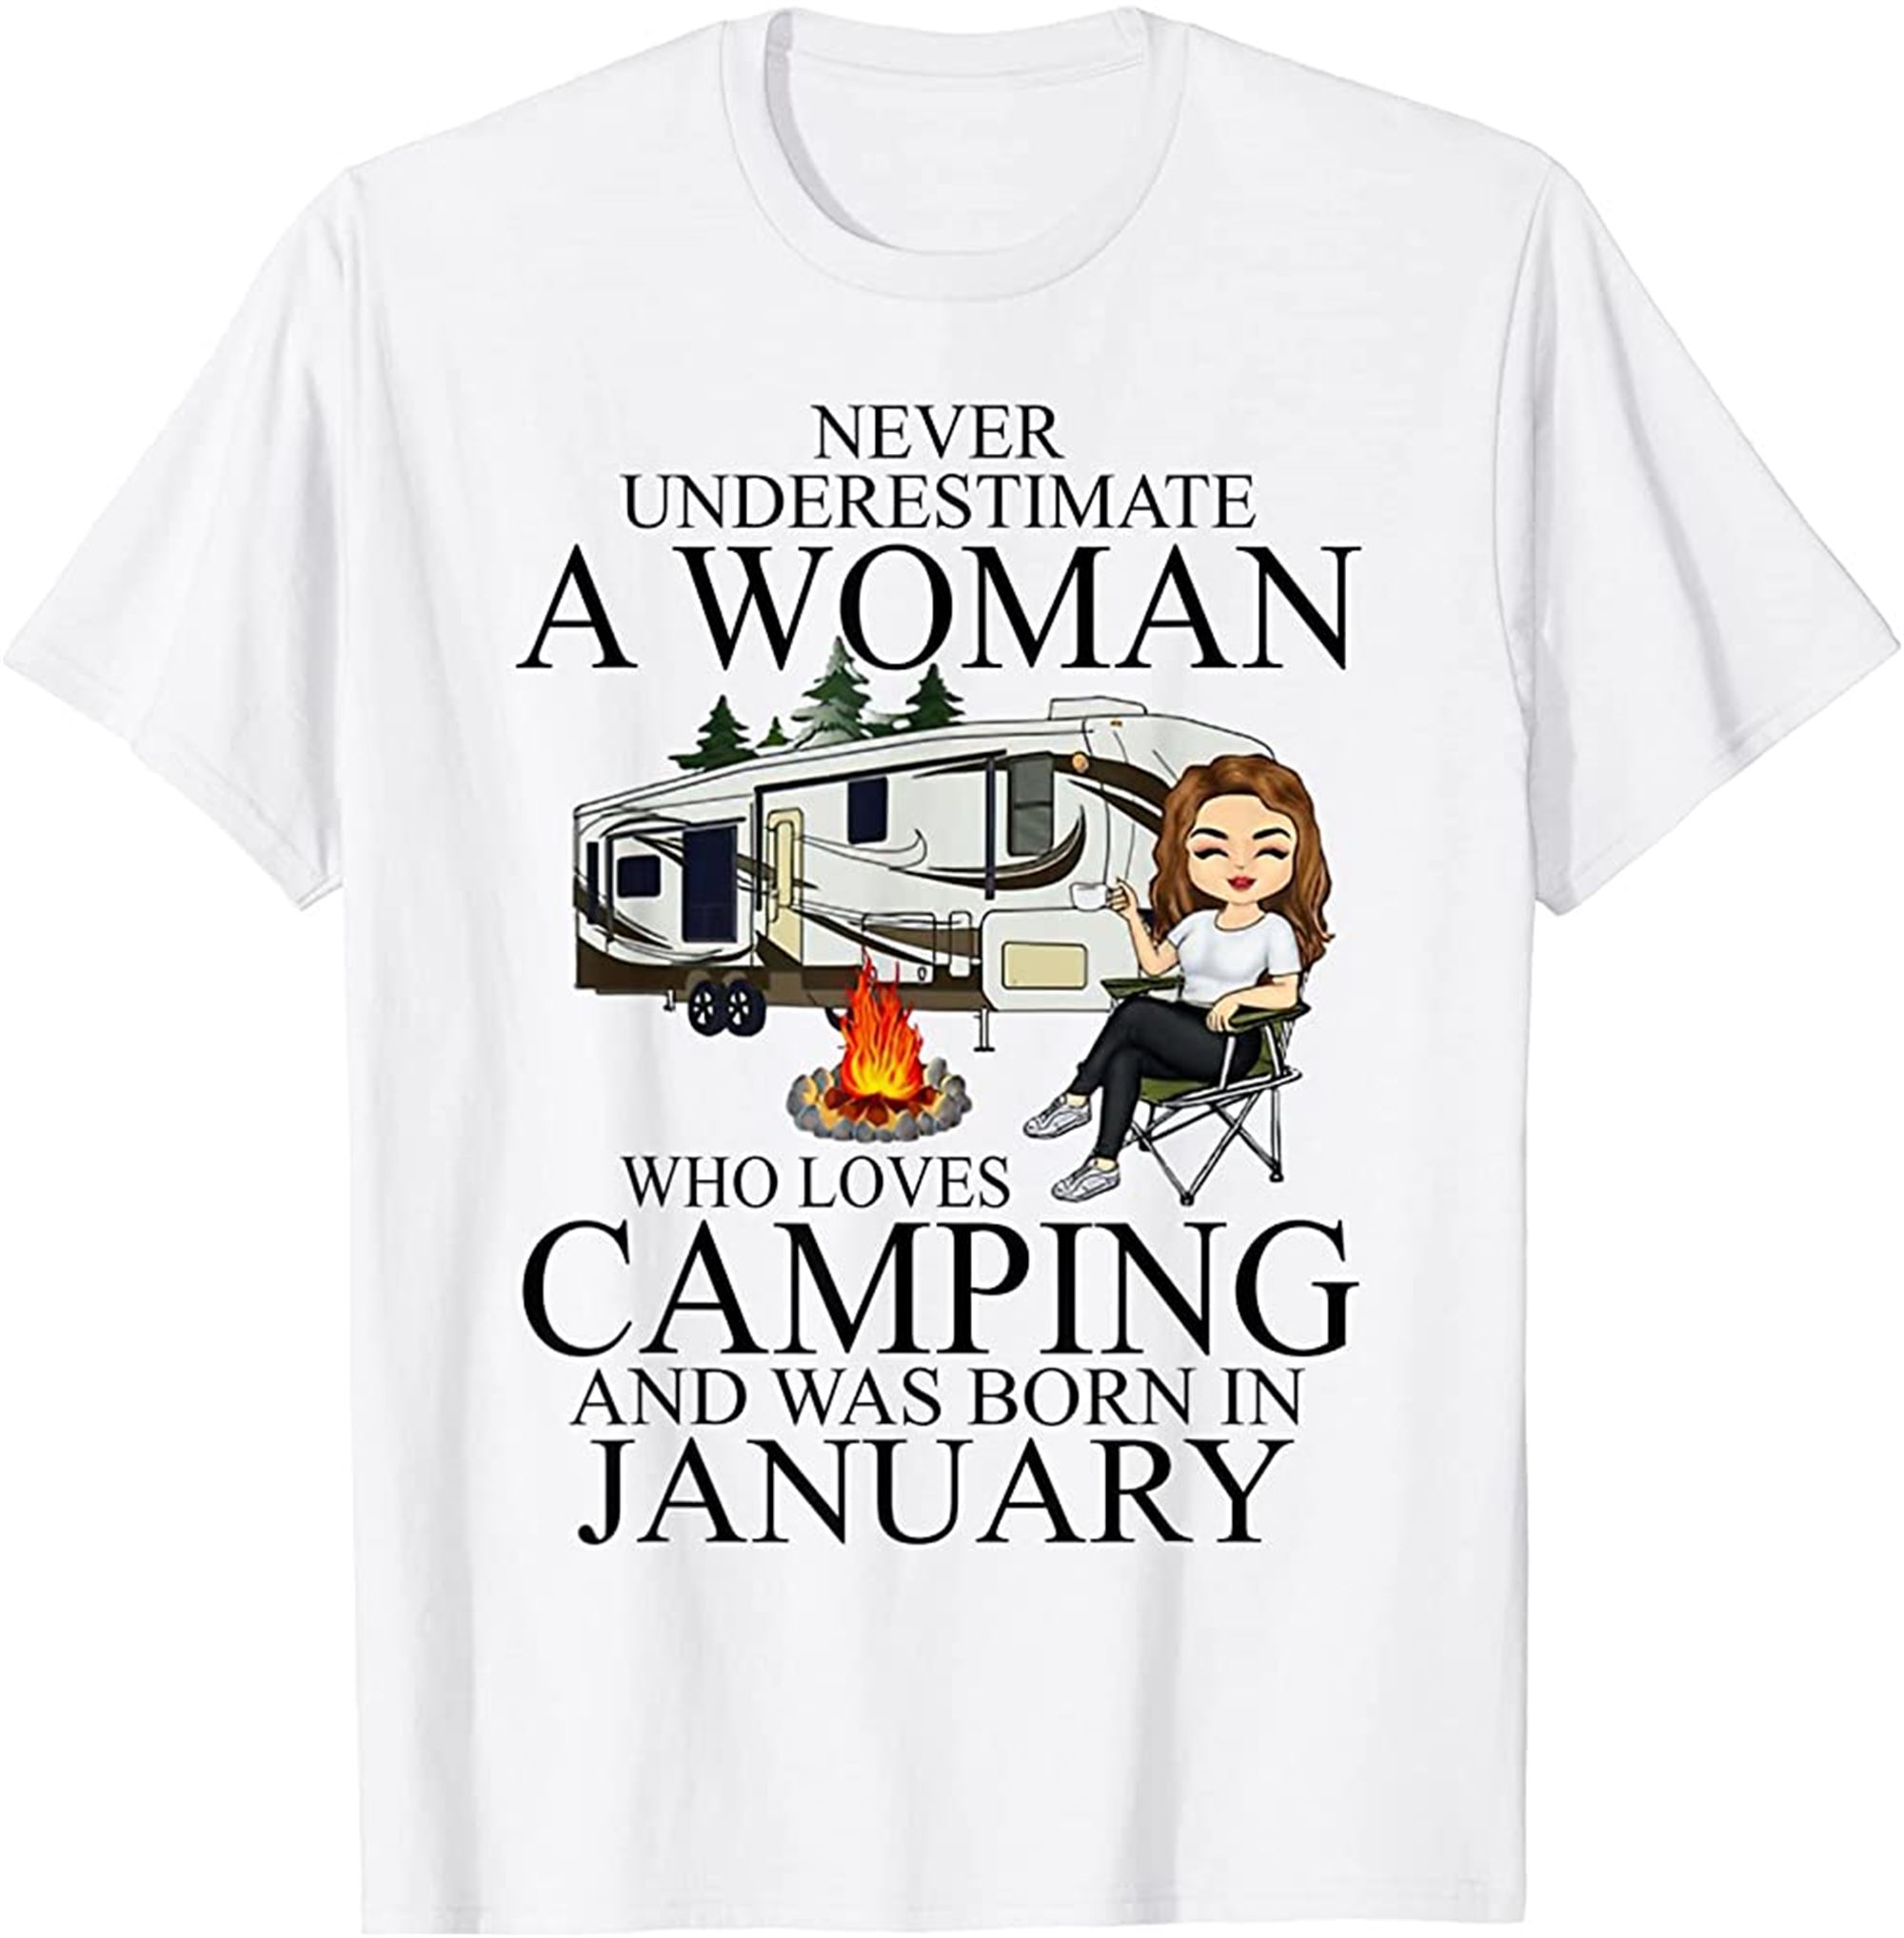 Never Underestimate A Woman Who Love Camping Born In January T-shirt Size Up To 5xl